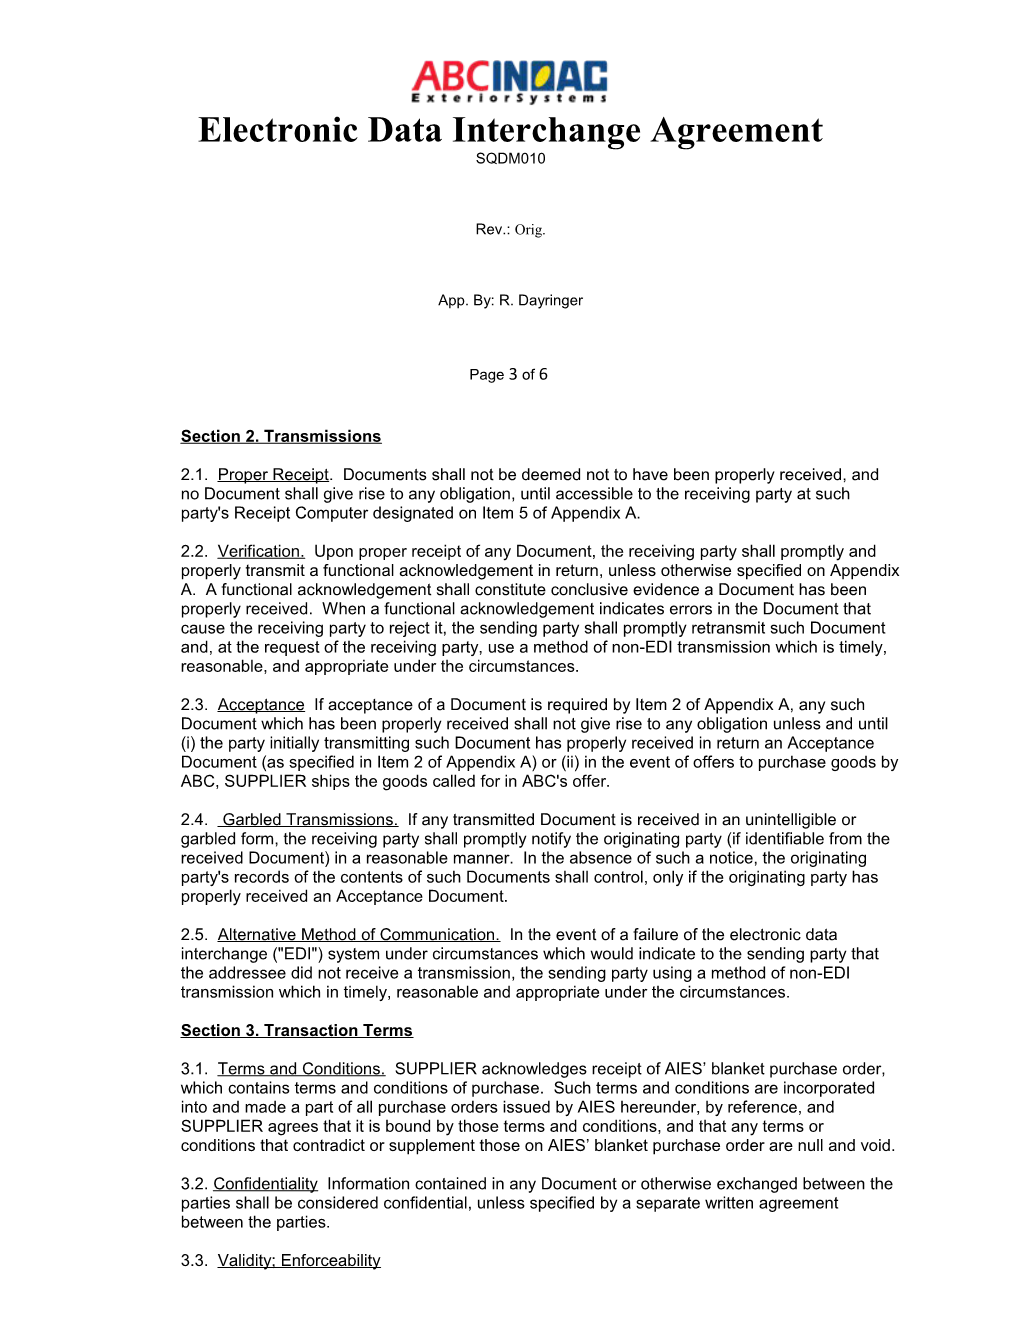 THIS ELECTRONIC DATA INTERCHANGE AGREEMENT ( the Agreement ) Is Made As Of